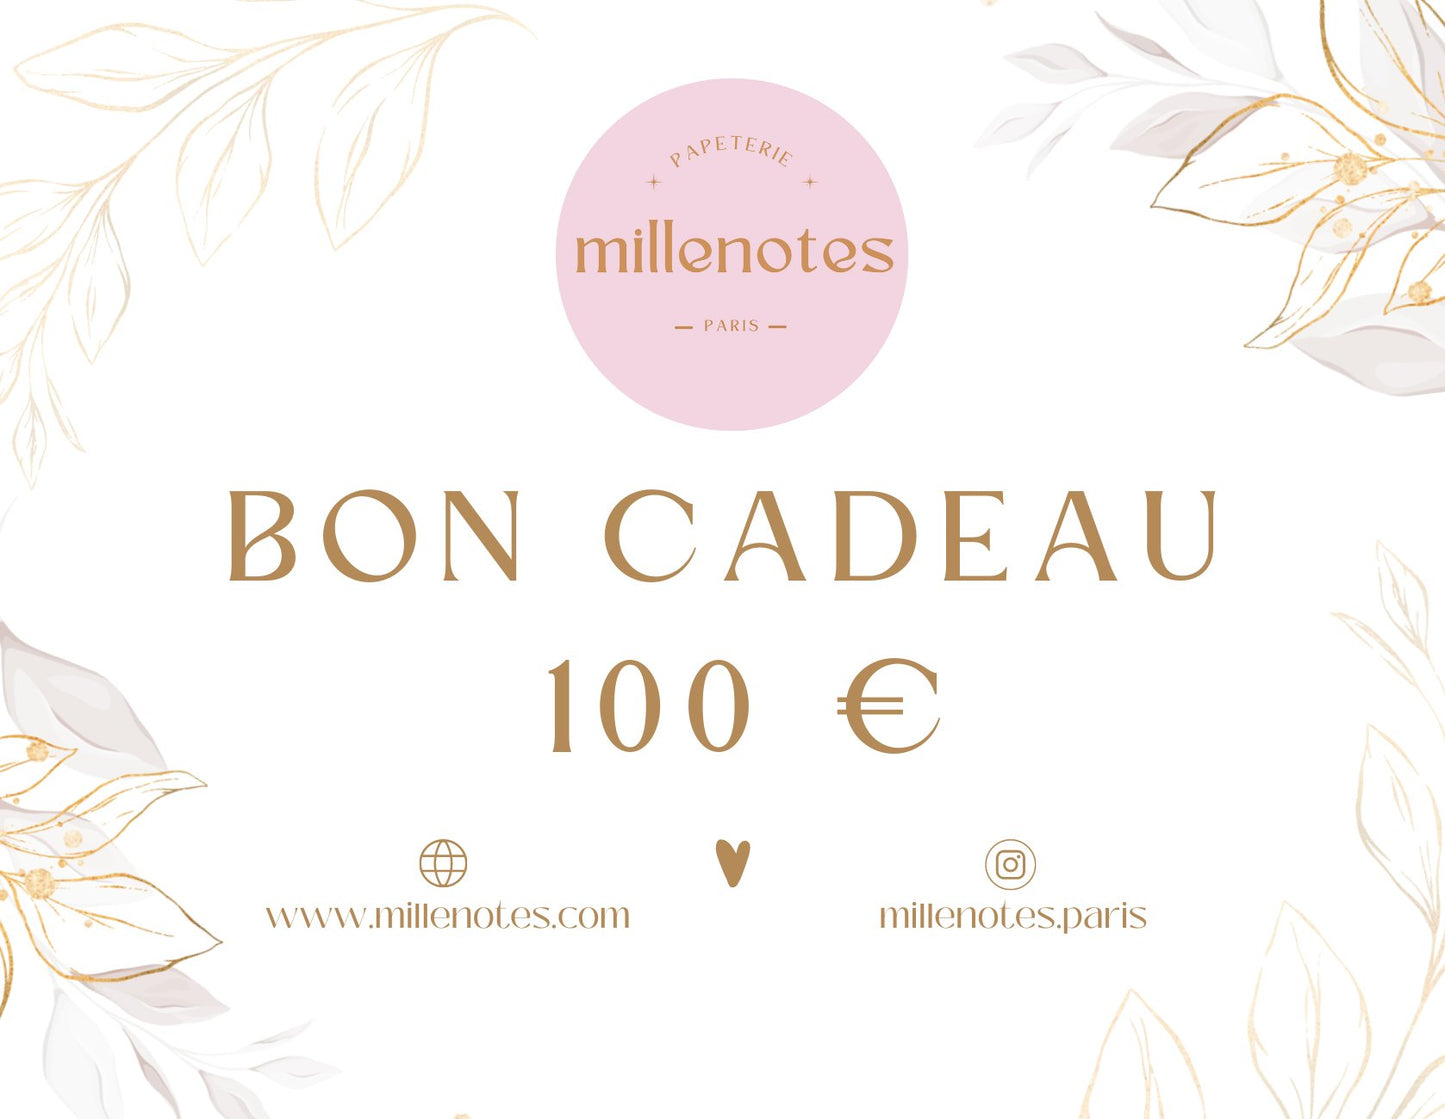 millenotes gift e-card - millenotes - €100.00 - millenotes